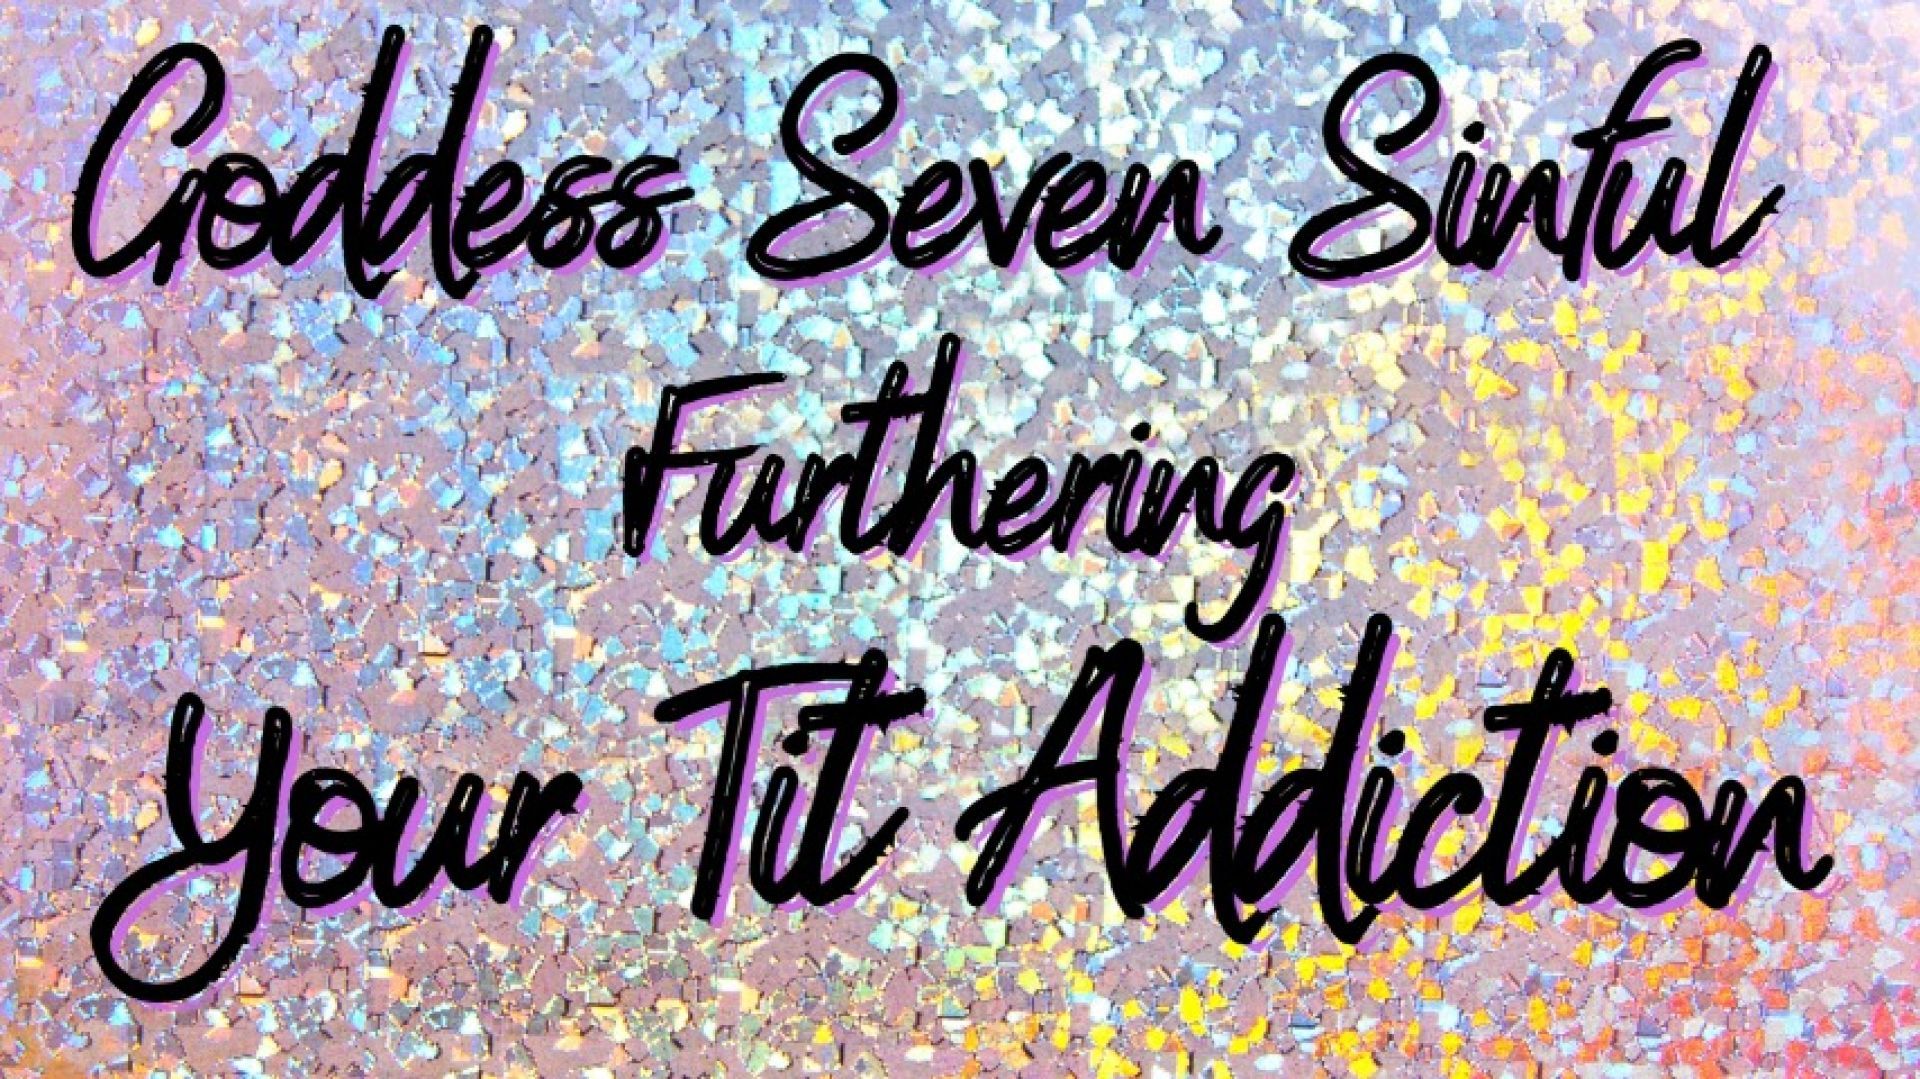 Goddess Seven Sinful Furthering your Tit Addiction